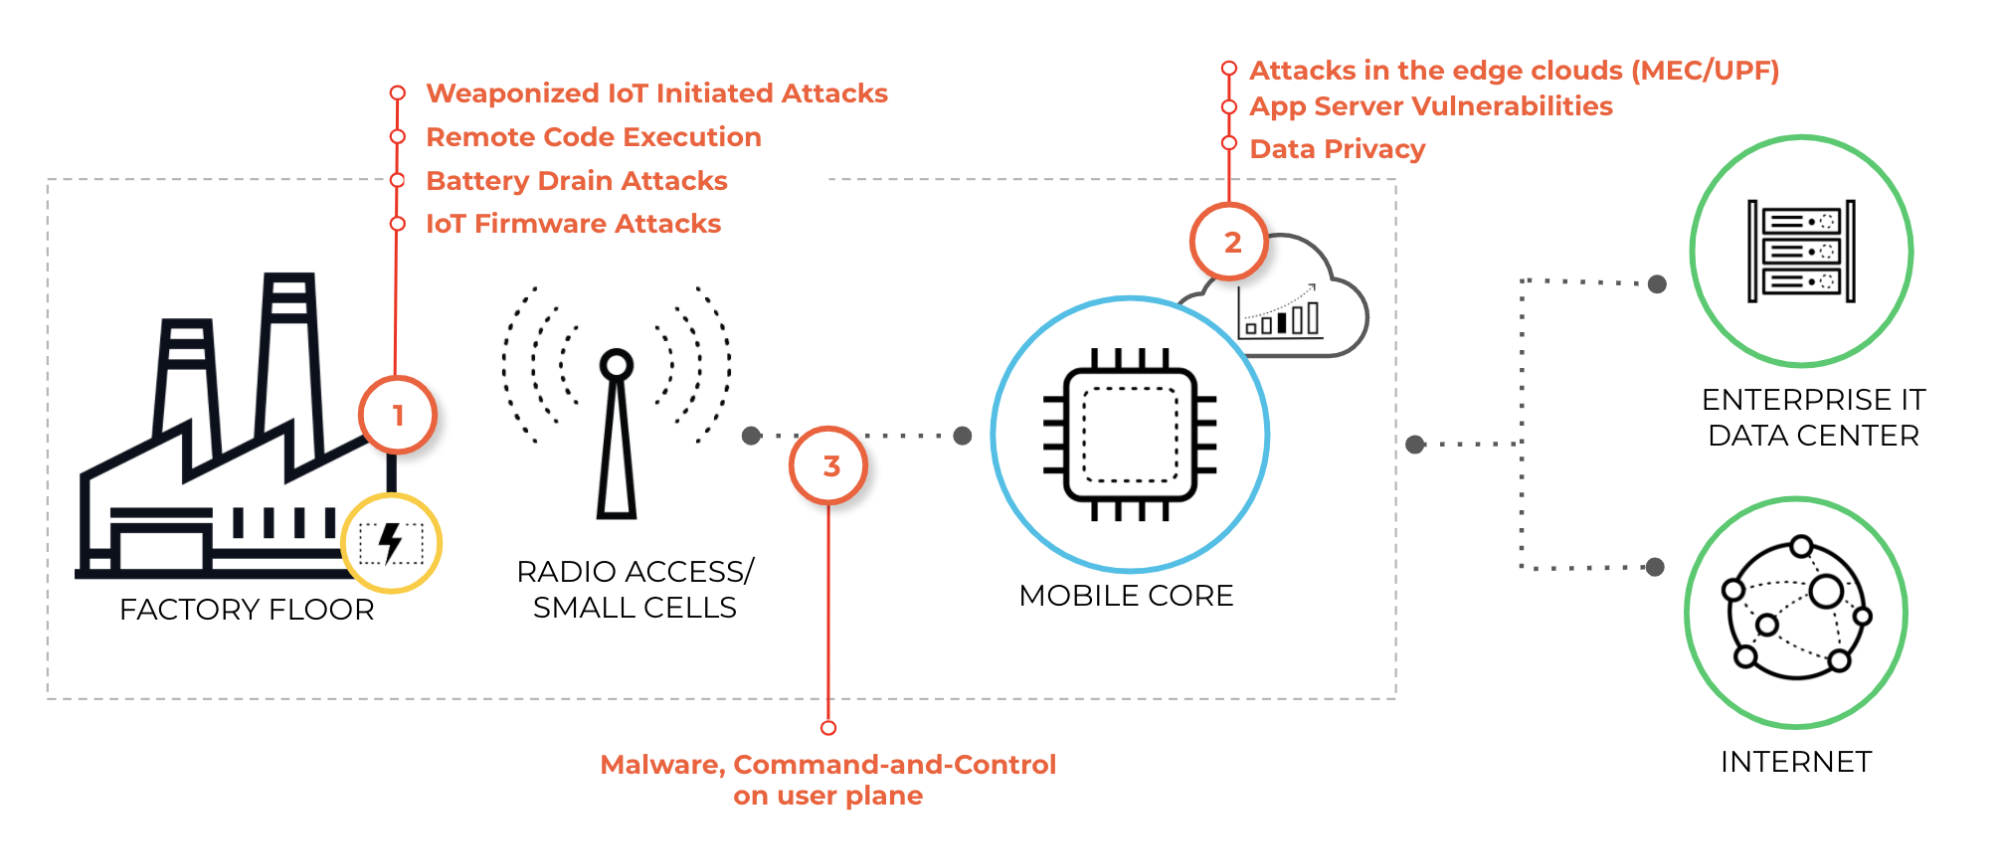 The figure shows 5G security considerations in an enterprise 5G deployment, including weaponized IoT initiated attacks, remote code execution, battery drain attacks, IoT firmware attacks, attacks in the edge clouds (MEC/UPF), app server vulnerabilities, data privacy, malware, and command and control on user plane.